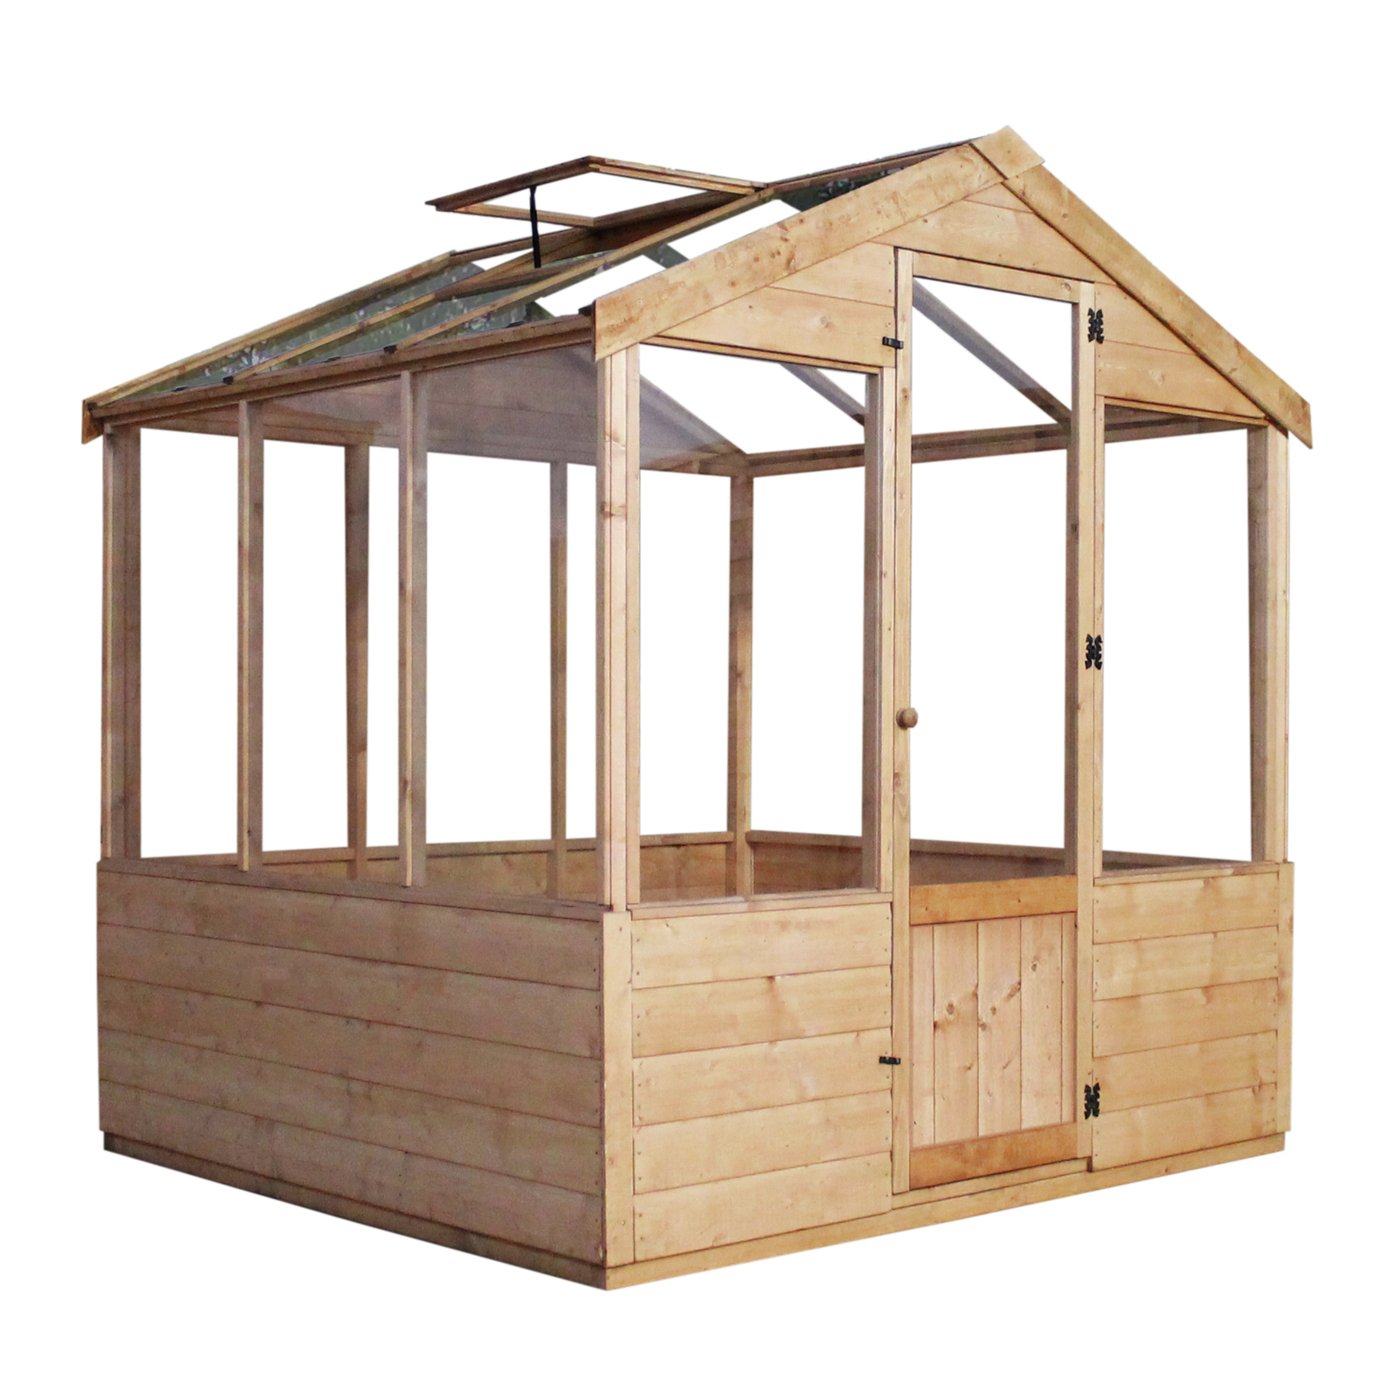 Mercia 6 x 6ft Traditional Greenhouse review